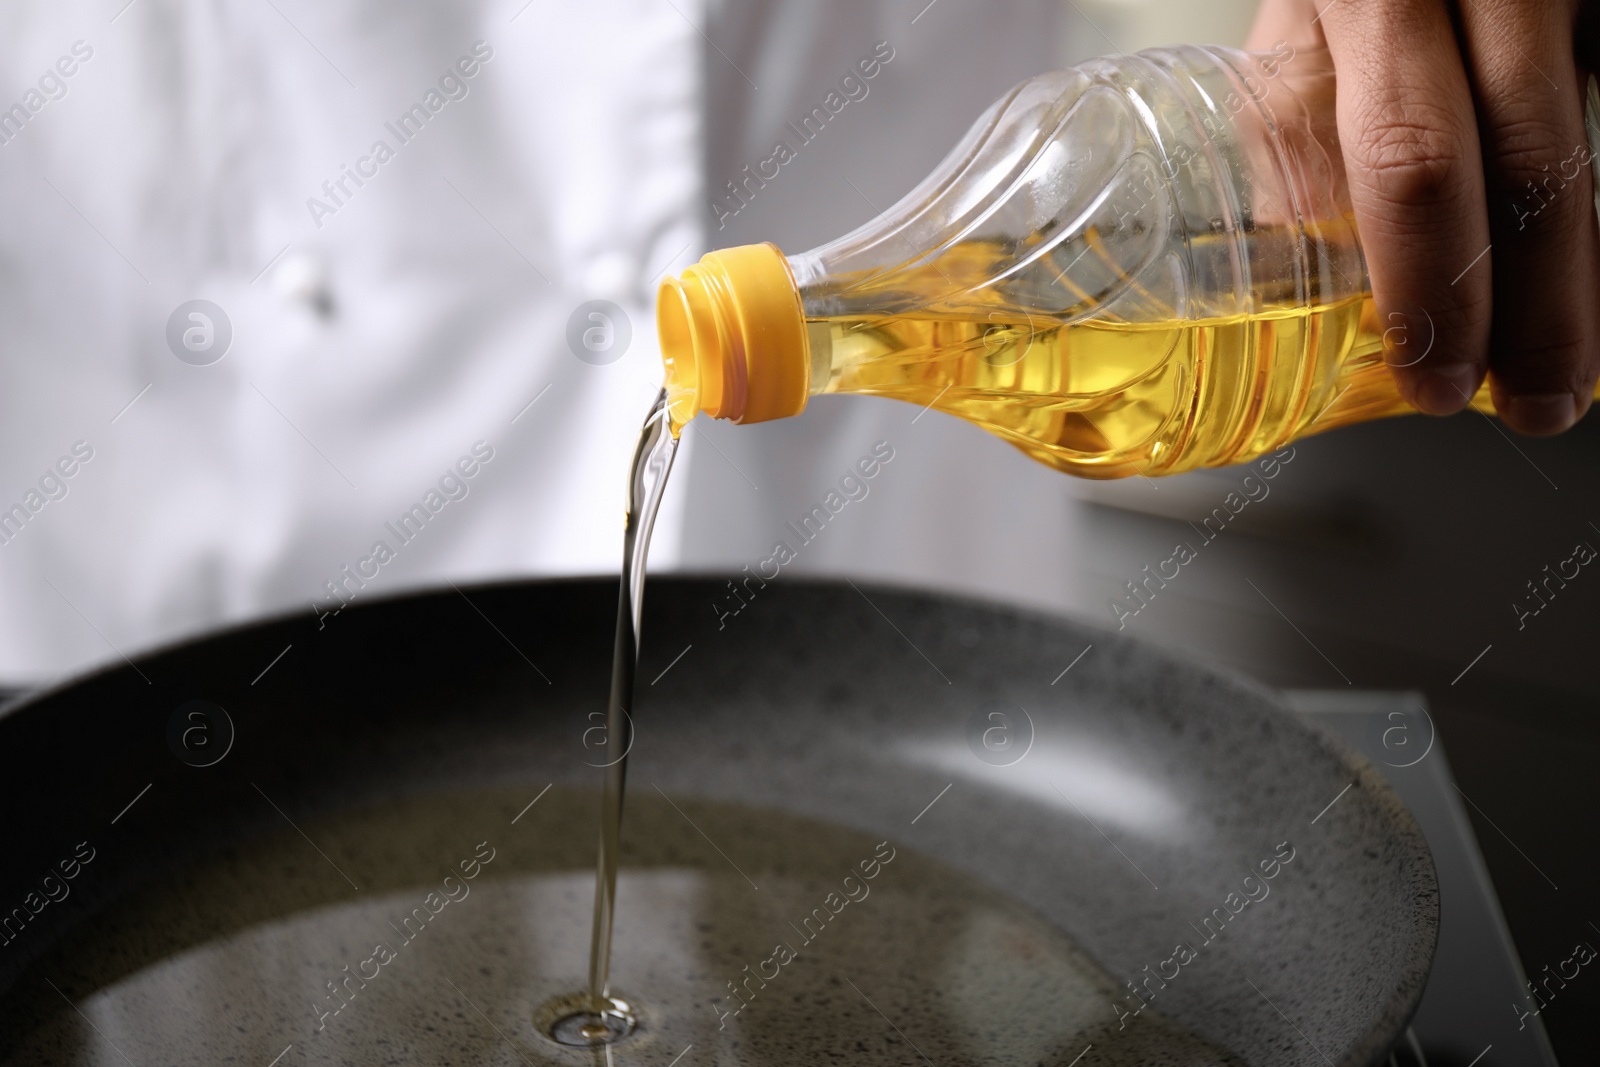 Photo of Man pouring cooking oil from bottle into frying pan, closeup